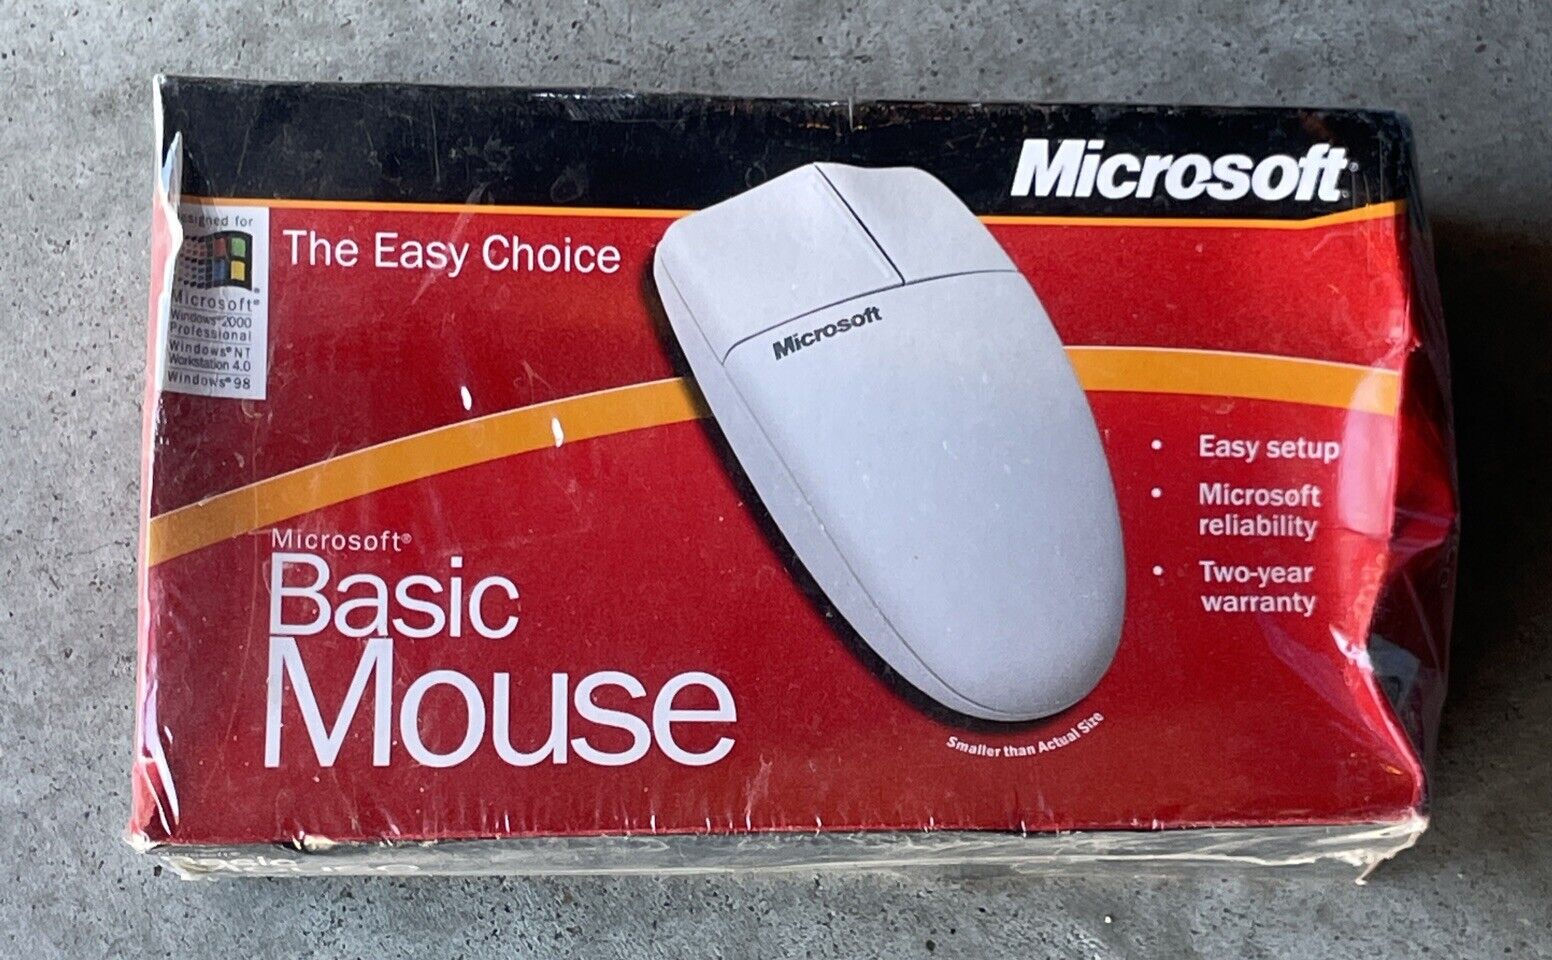 MICROSOFT Basic Mouse 1.0 PS/2 Windows 98 2000 Computer Wired New SEALED Vintage